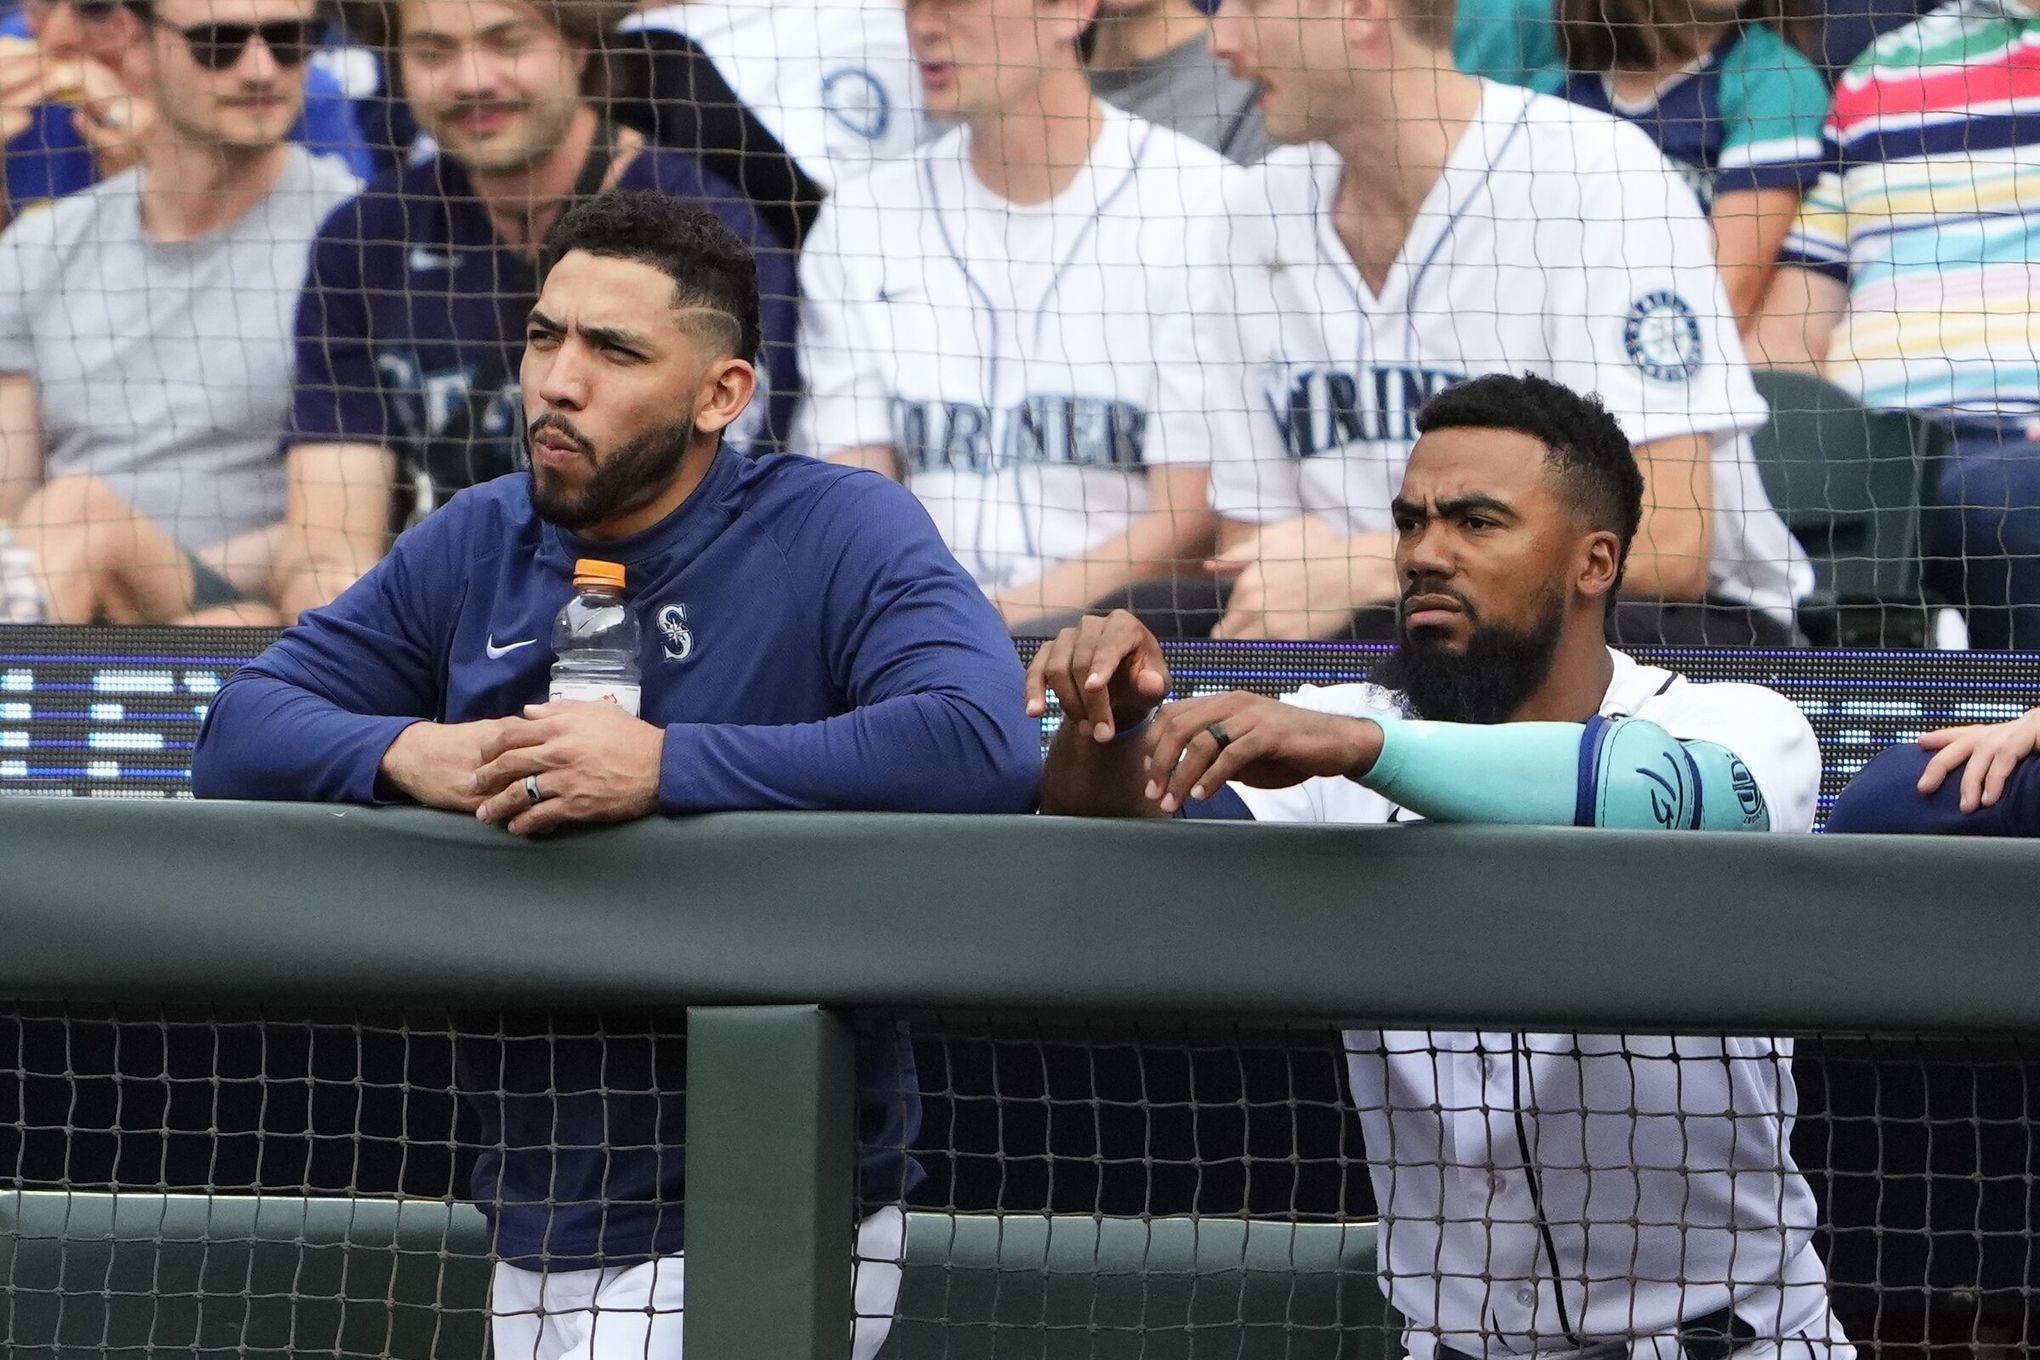 The Mariners Will Go As Far As Their Young Talent Takes Them